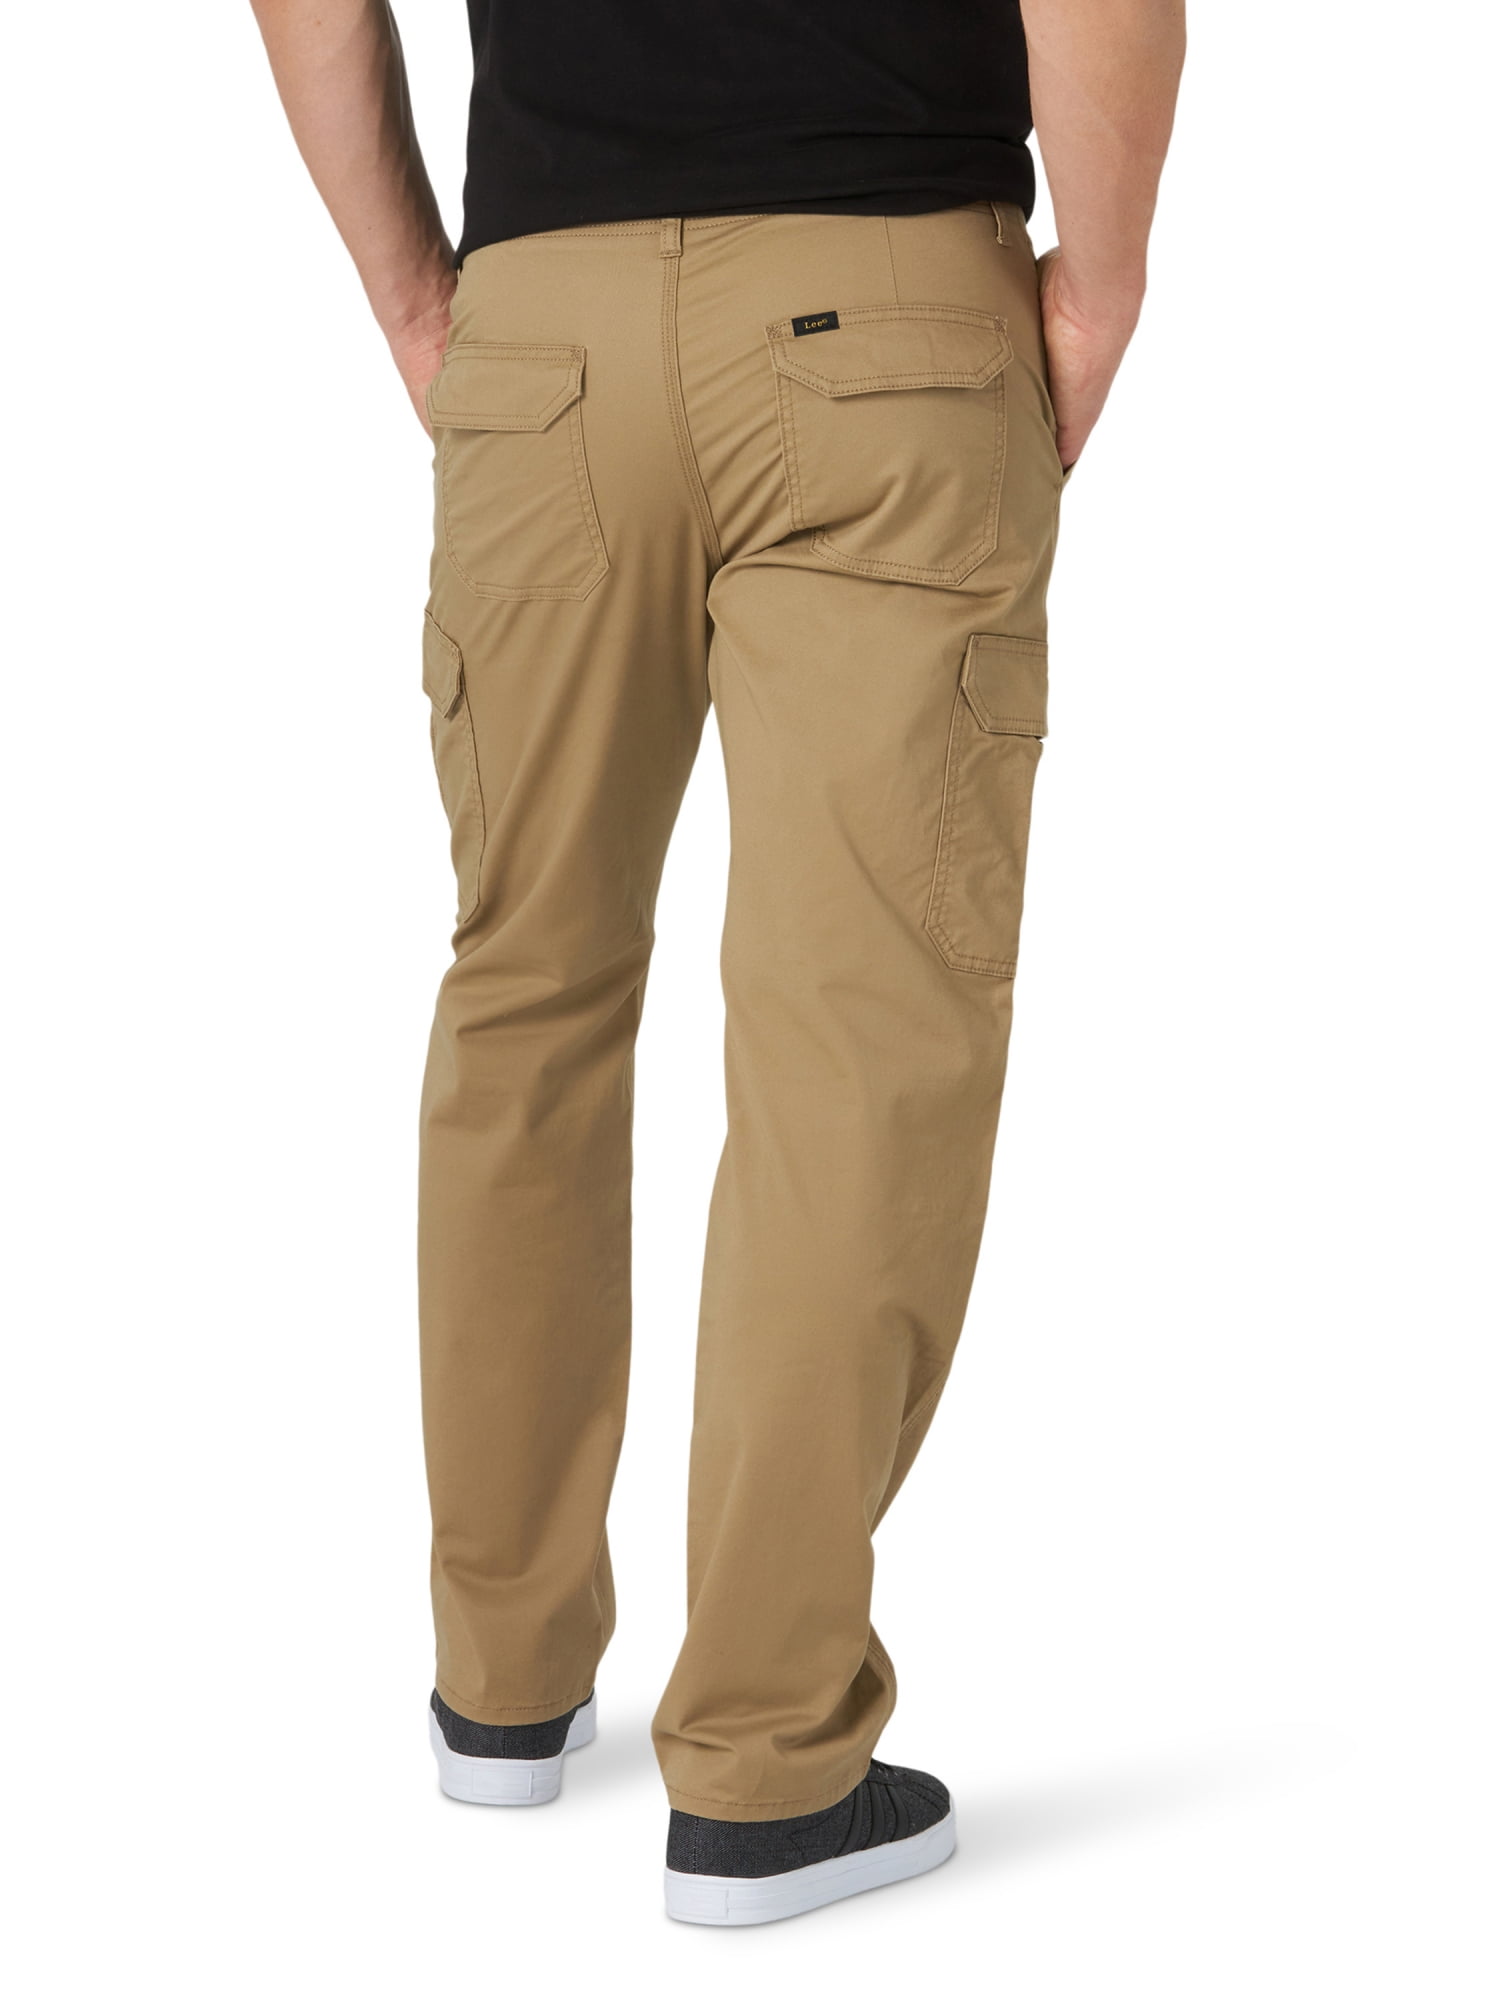 Lee Men's Extreme Motion Twill Cargo Pants - 4277115-30x30